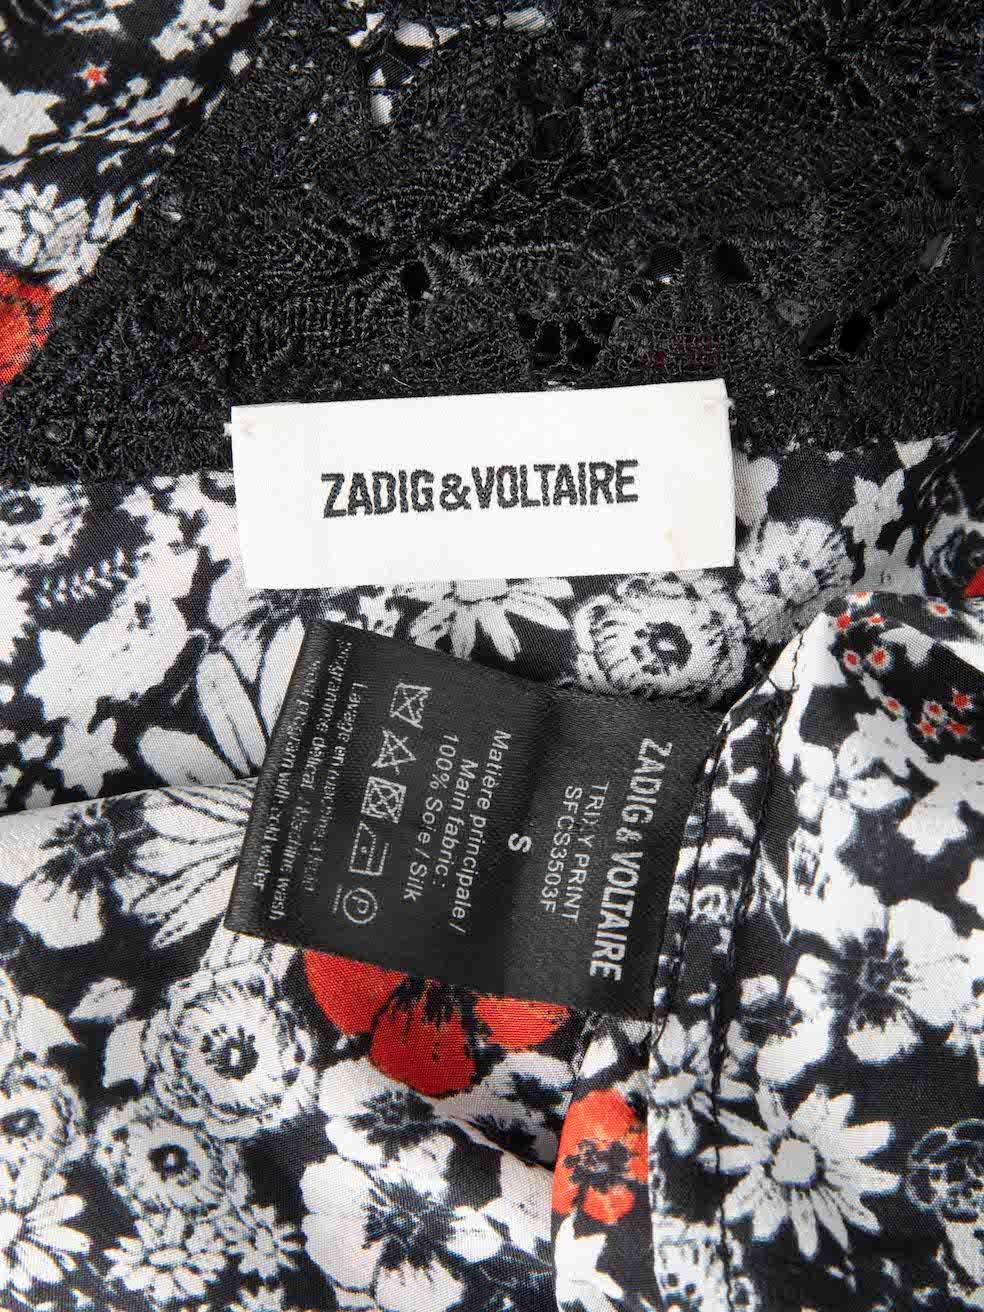 Zadig & Voltaire Women's Floral Print Silk Sleeveless Lace Trim Top 1